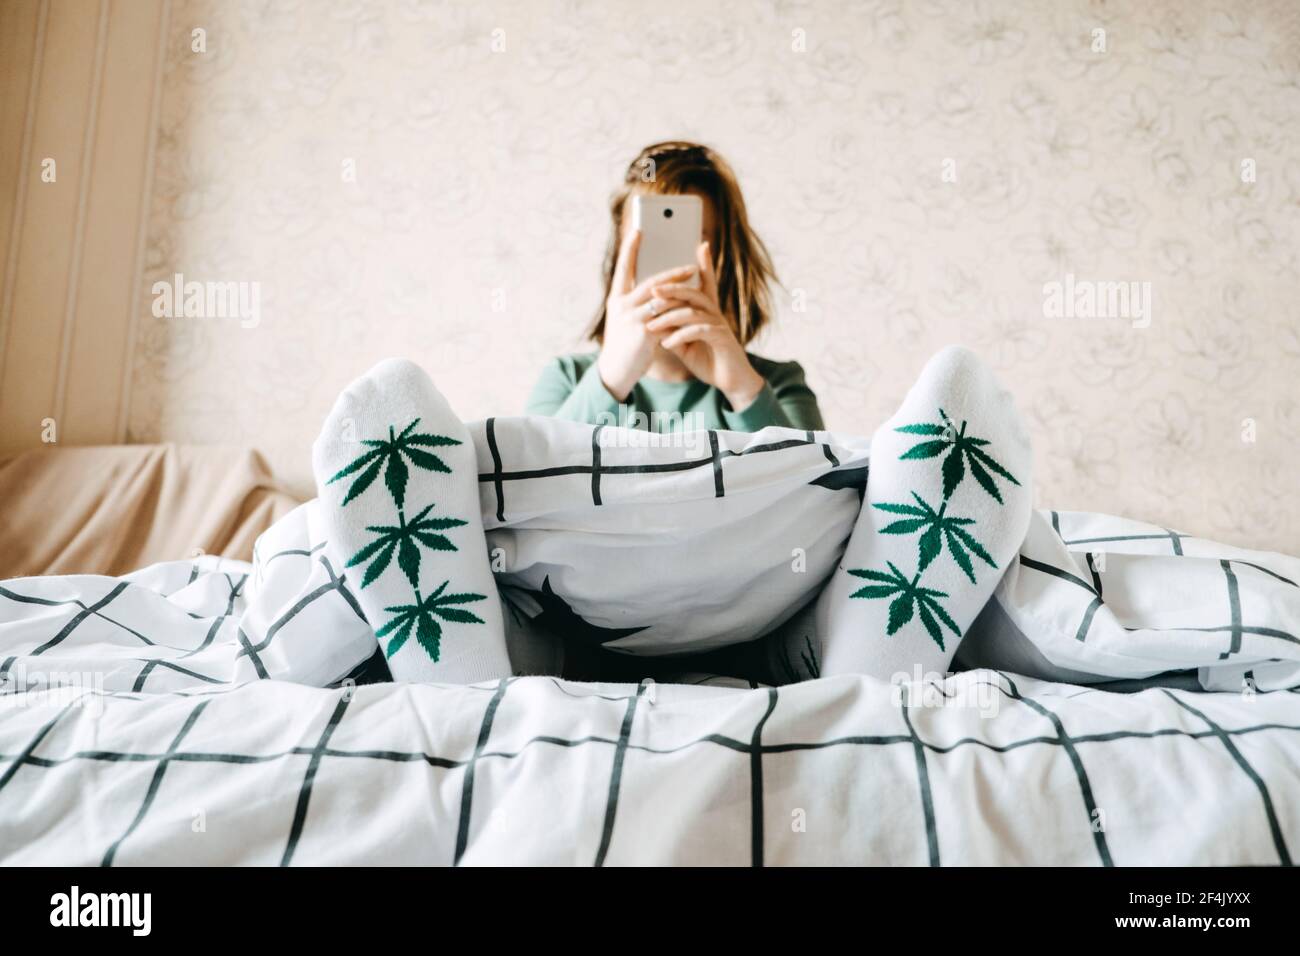 Self care, calm, mourning routine, start day. Mental health, self care, No stress, healthy habit, Use of Marijuana for Anxiety concept. Woman in socks Stock Photo